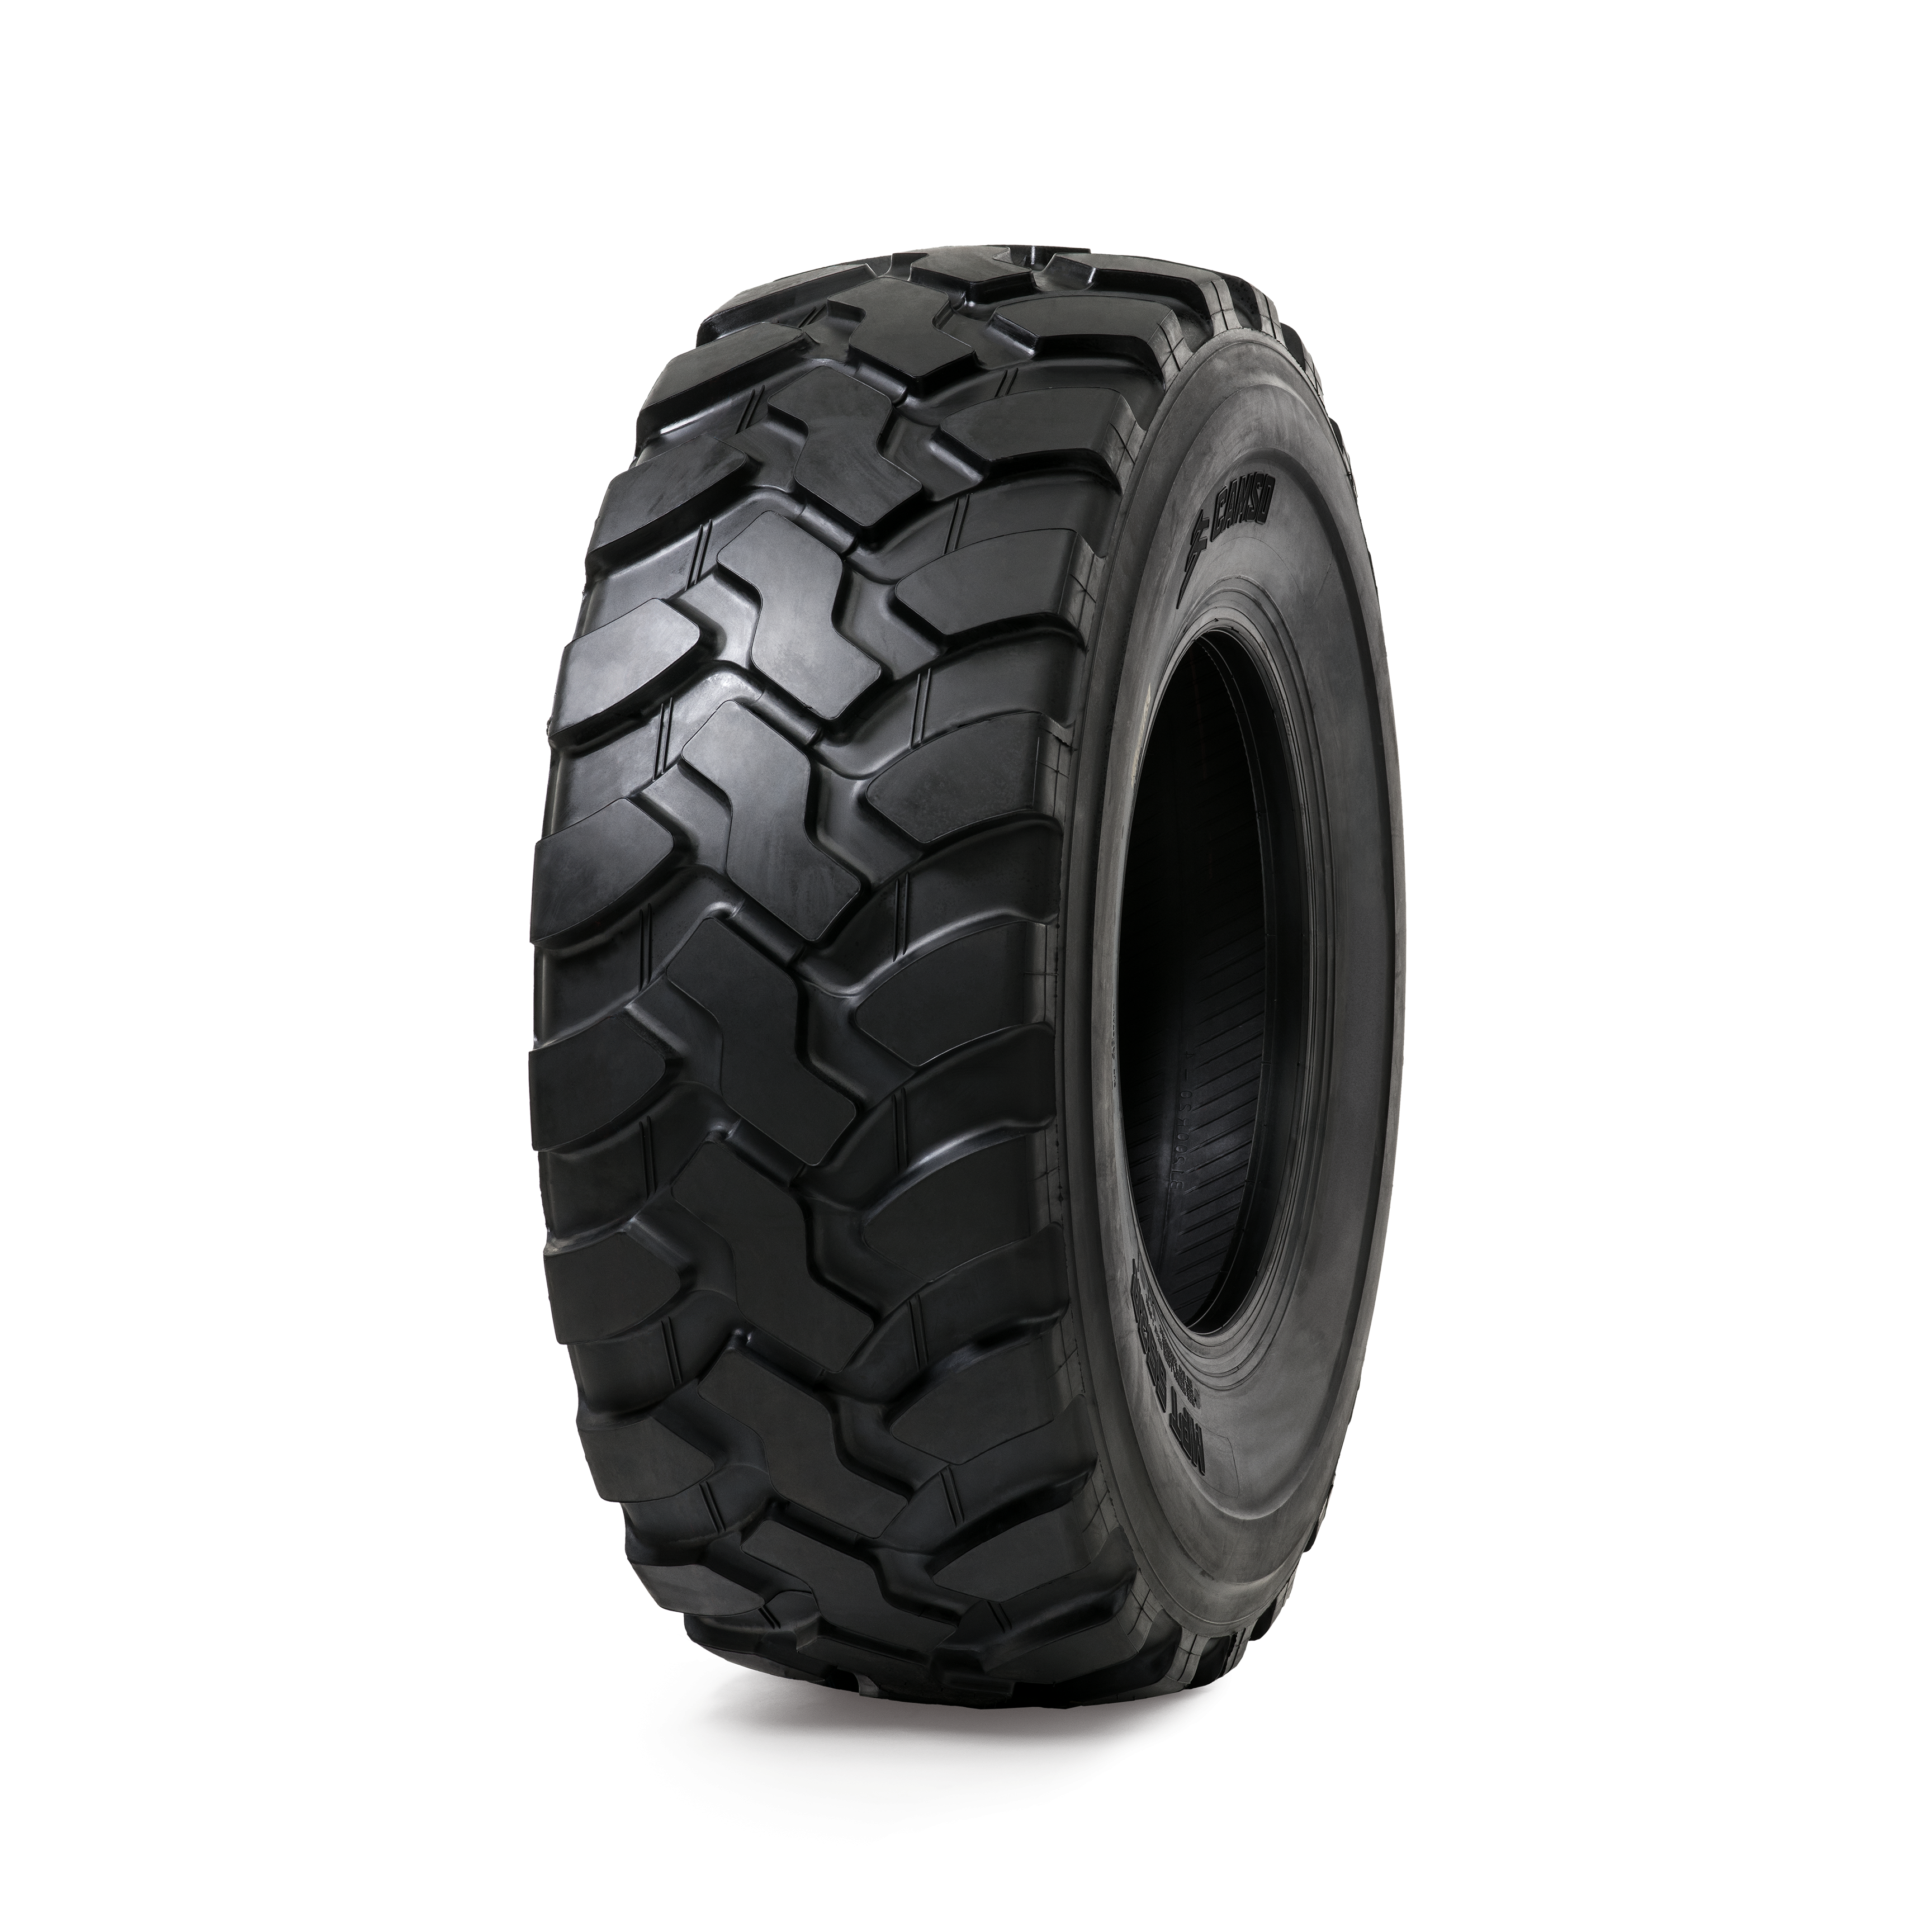 Camso Construction Tyres